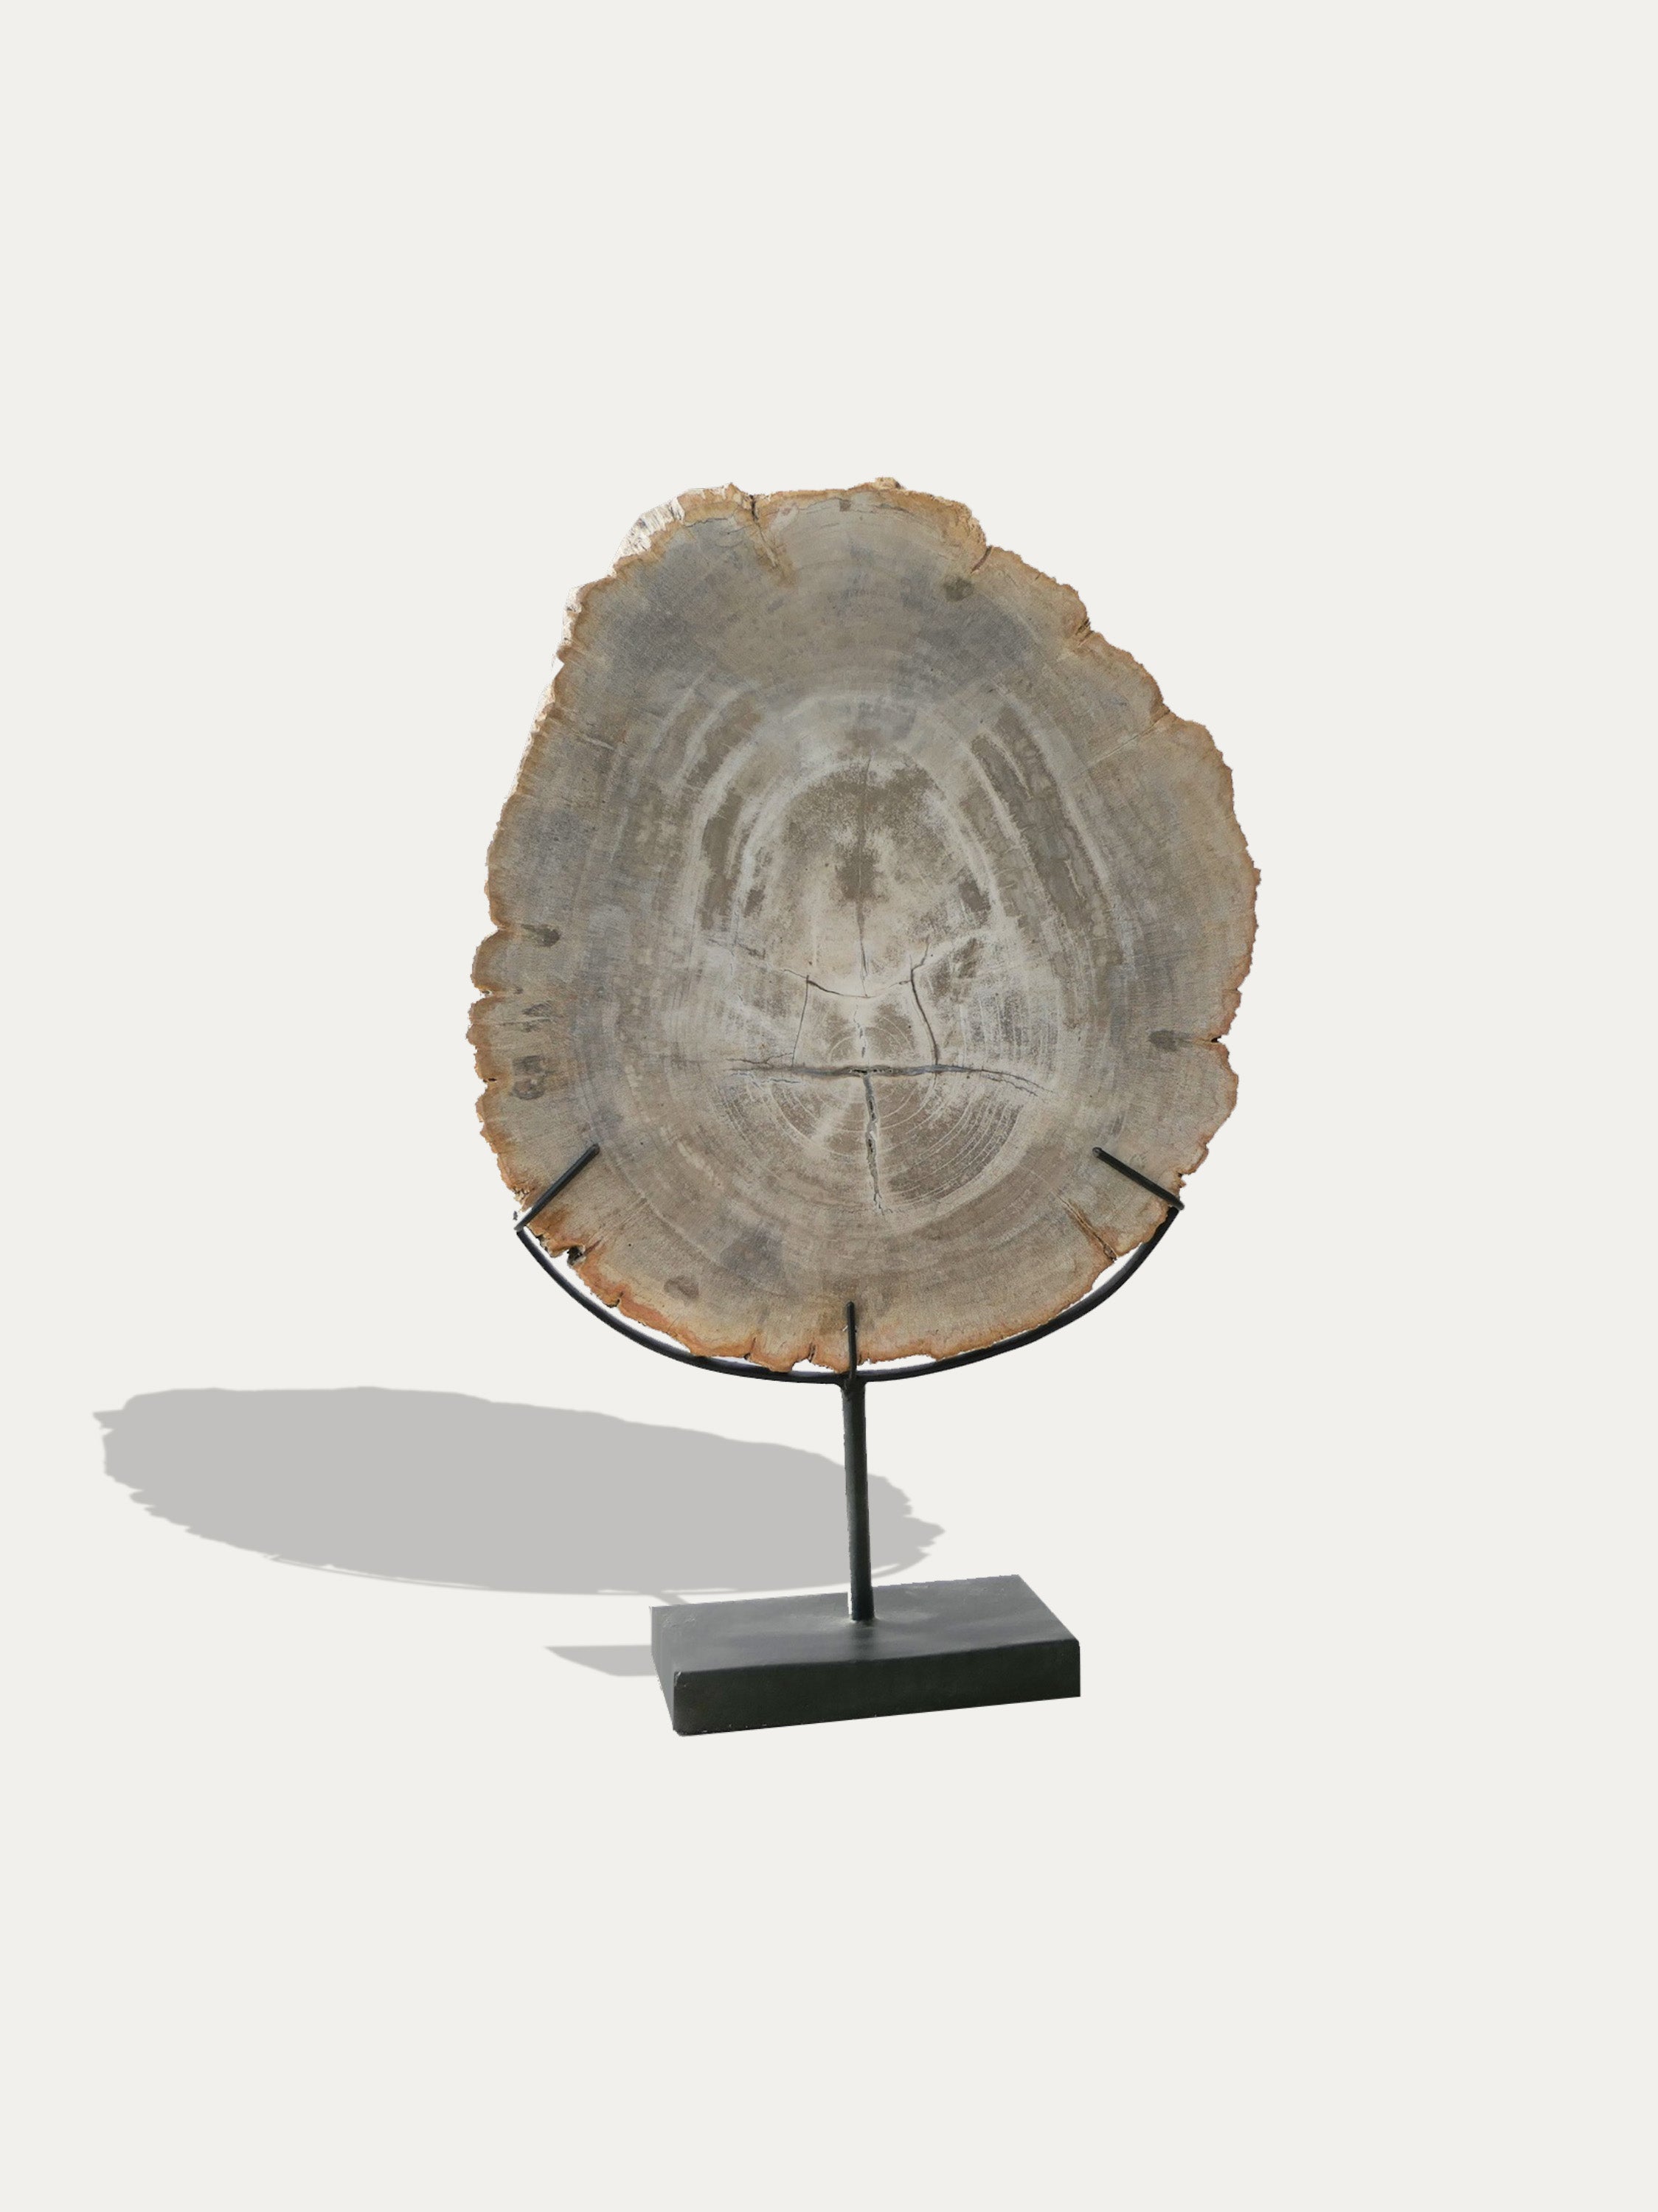 Petrified / Fossilized Wood Tray and sculpture, scultura in legno